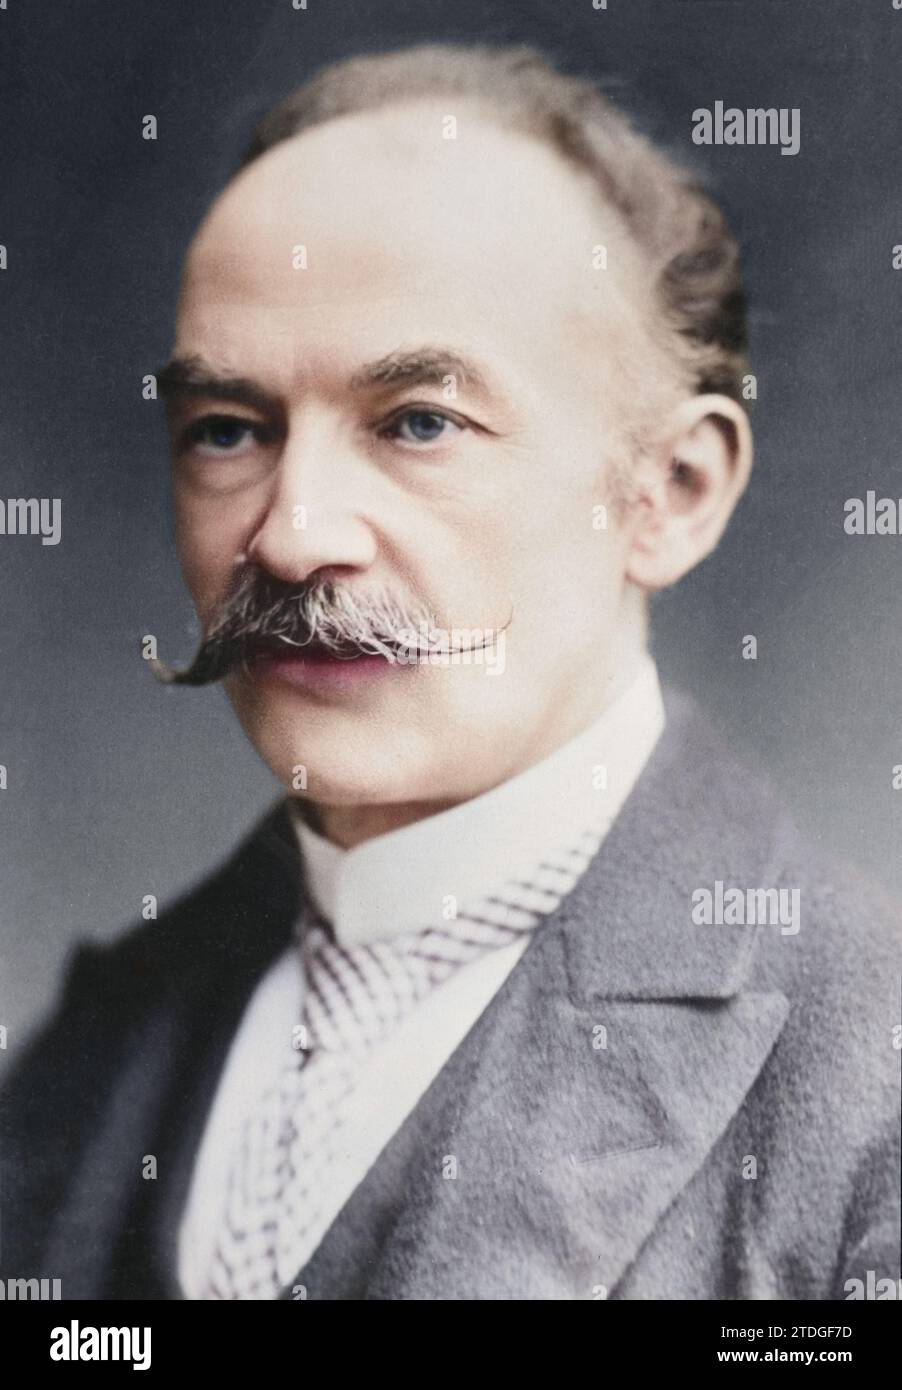 A portrait of Thomas Hardy. Year: between ca. 1910-15. By Bain News Service, publisher. Stock Photo